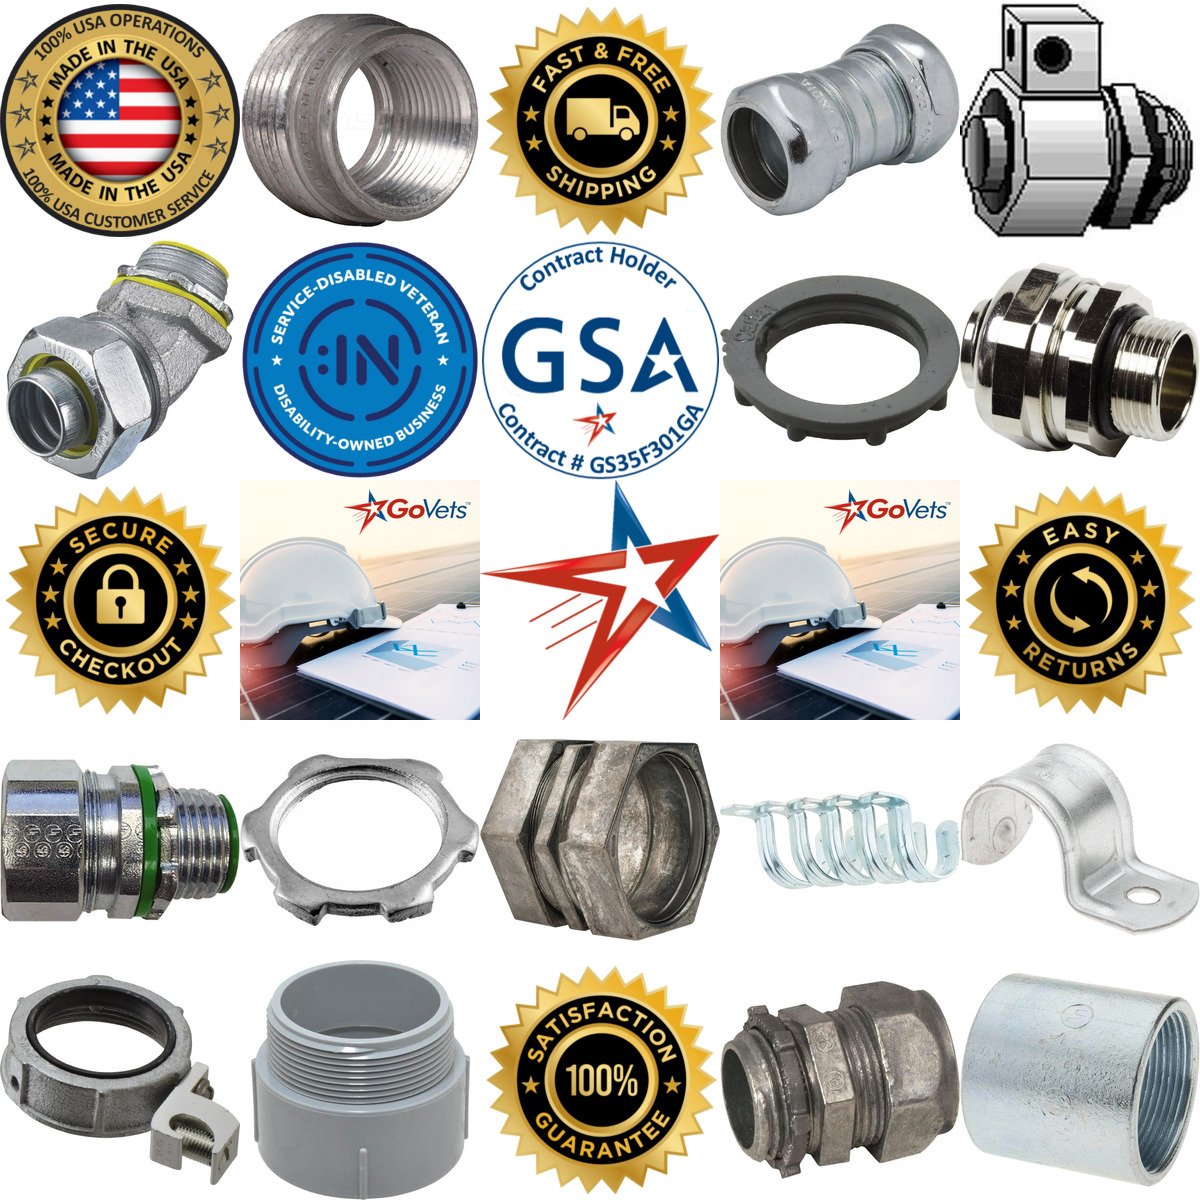 A selection of Conduit Fittings and Accessories products on GoVets